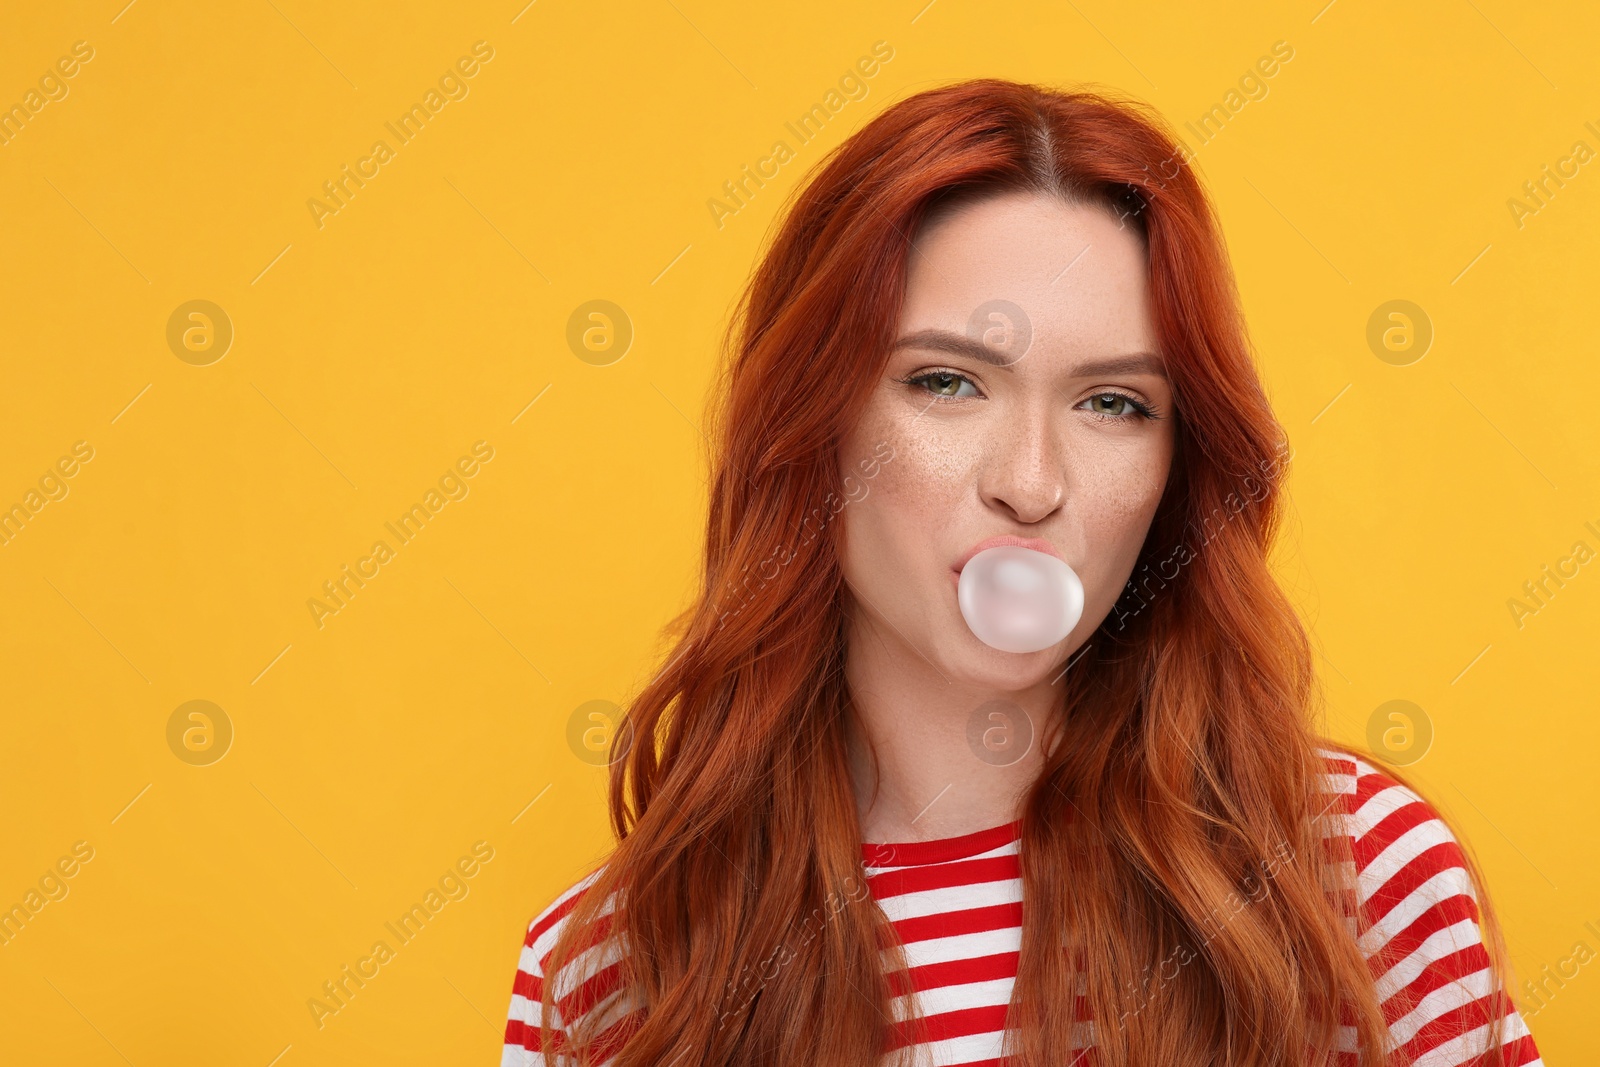 Photo of Portrait of beautiful woman blowing bubble gum on orange background. Space for text